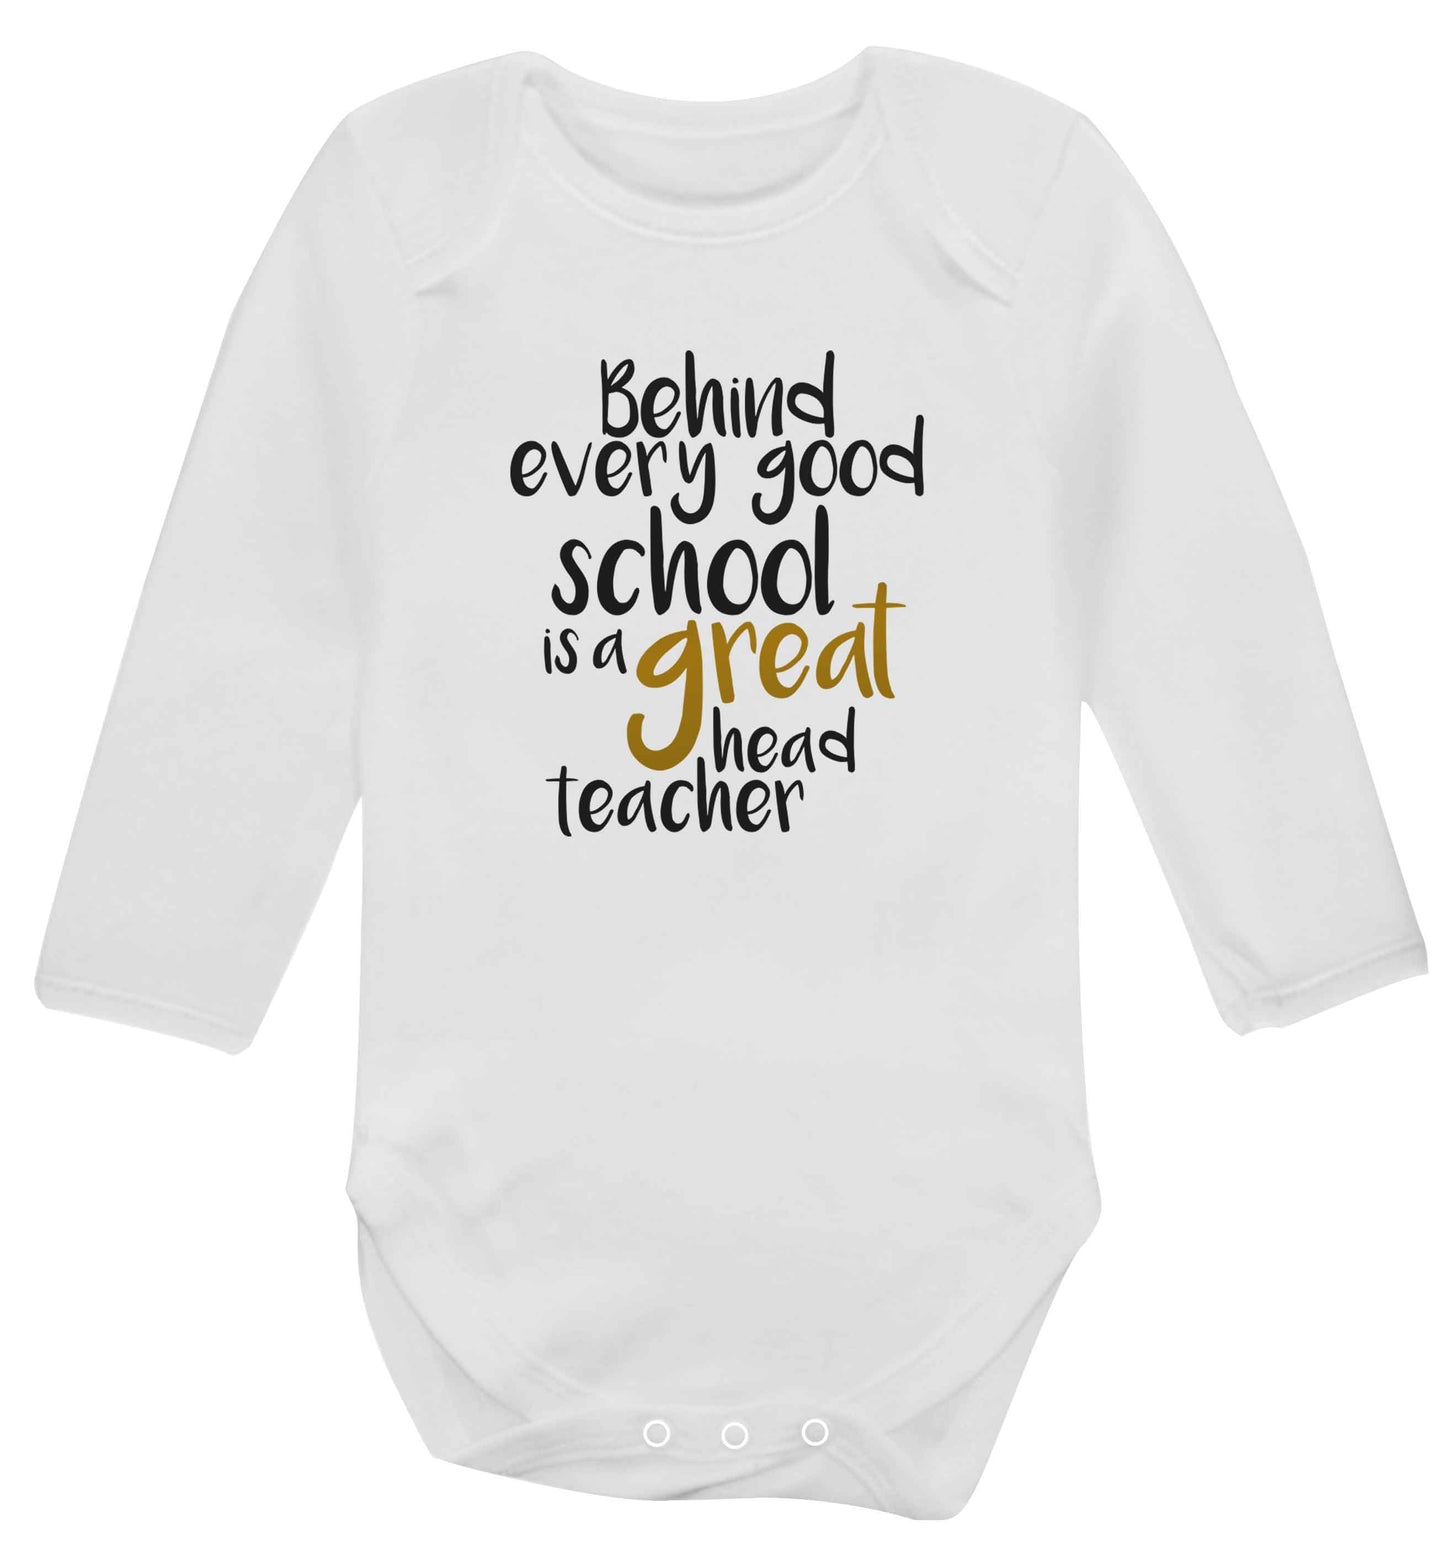 Behind every good school is a great head teacher baby vest long sleeved white 6-12 months